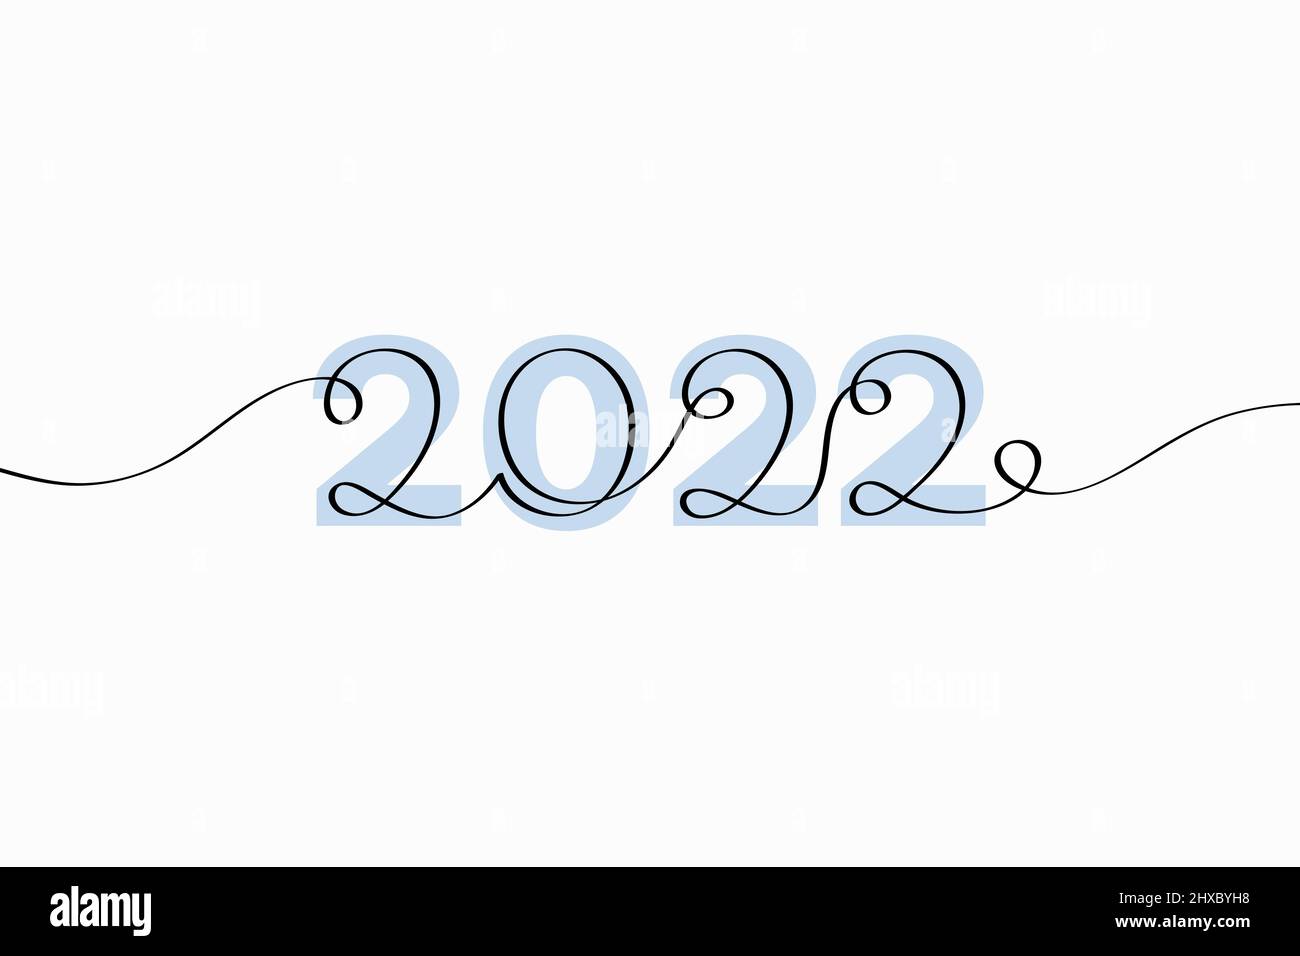 The year 2022 abstract lettering. Vector illustration of creative typography with continuous one line hand drawn text isolated on white background Stock Vector